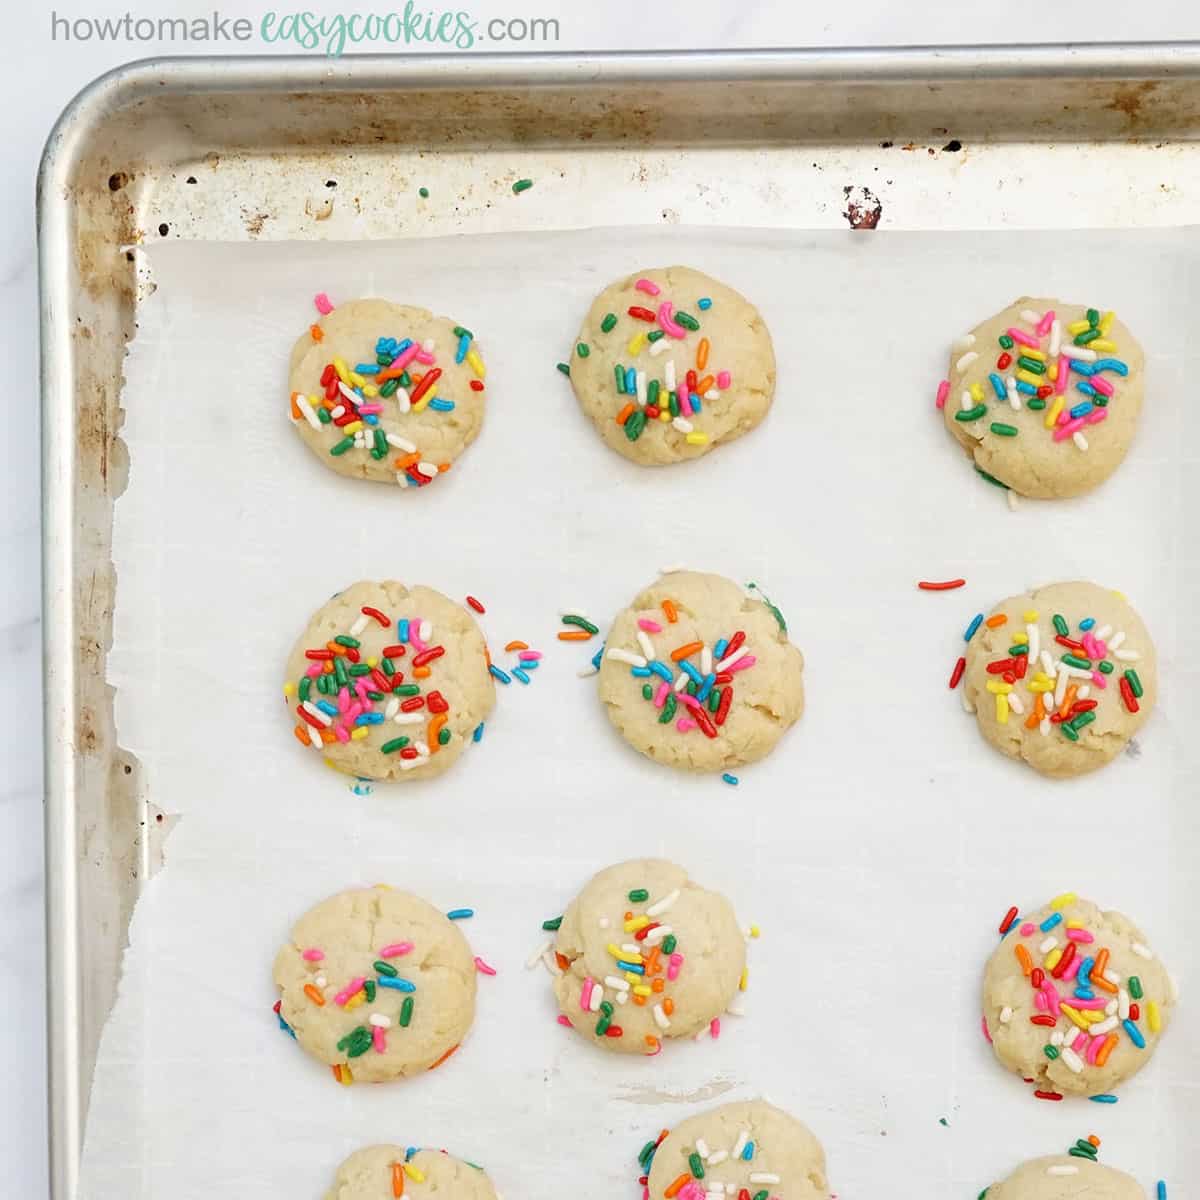 baked sugar cookies with sprinkles on baking tray